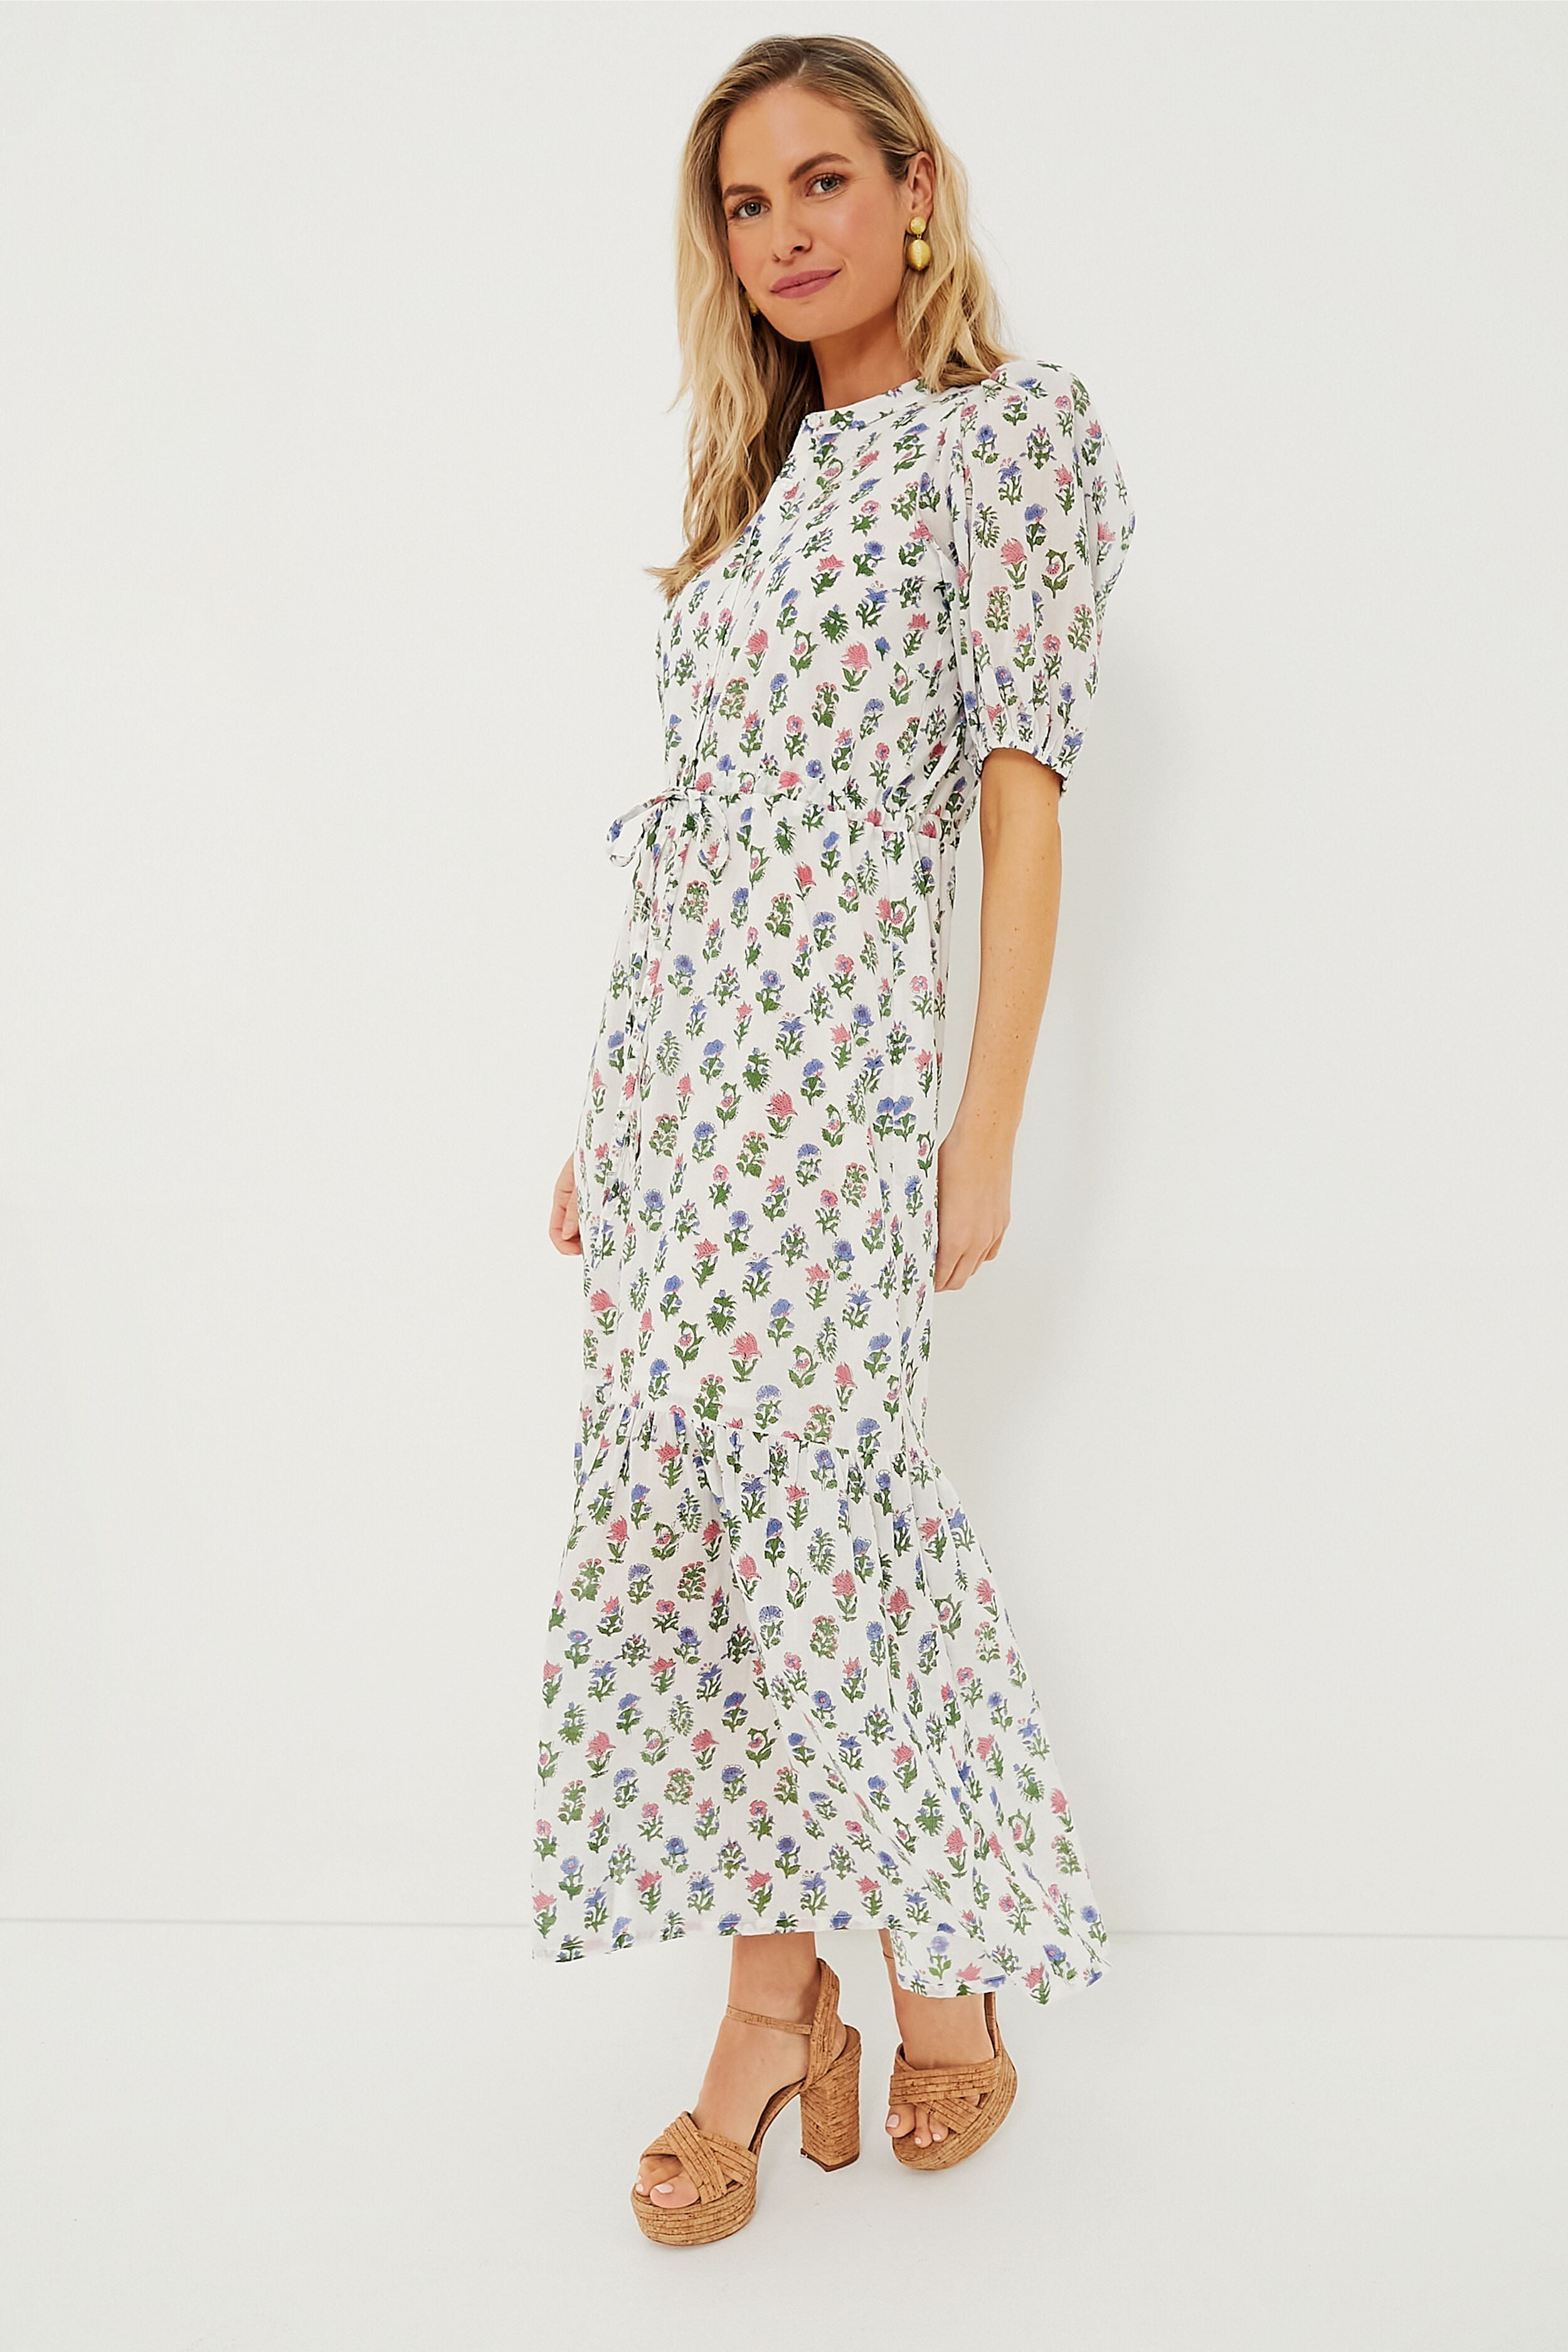 Exclusive Mixed Bouquet Organic Lucy Dress | India Collection by Emerson Fry